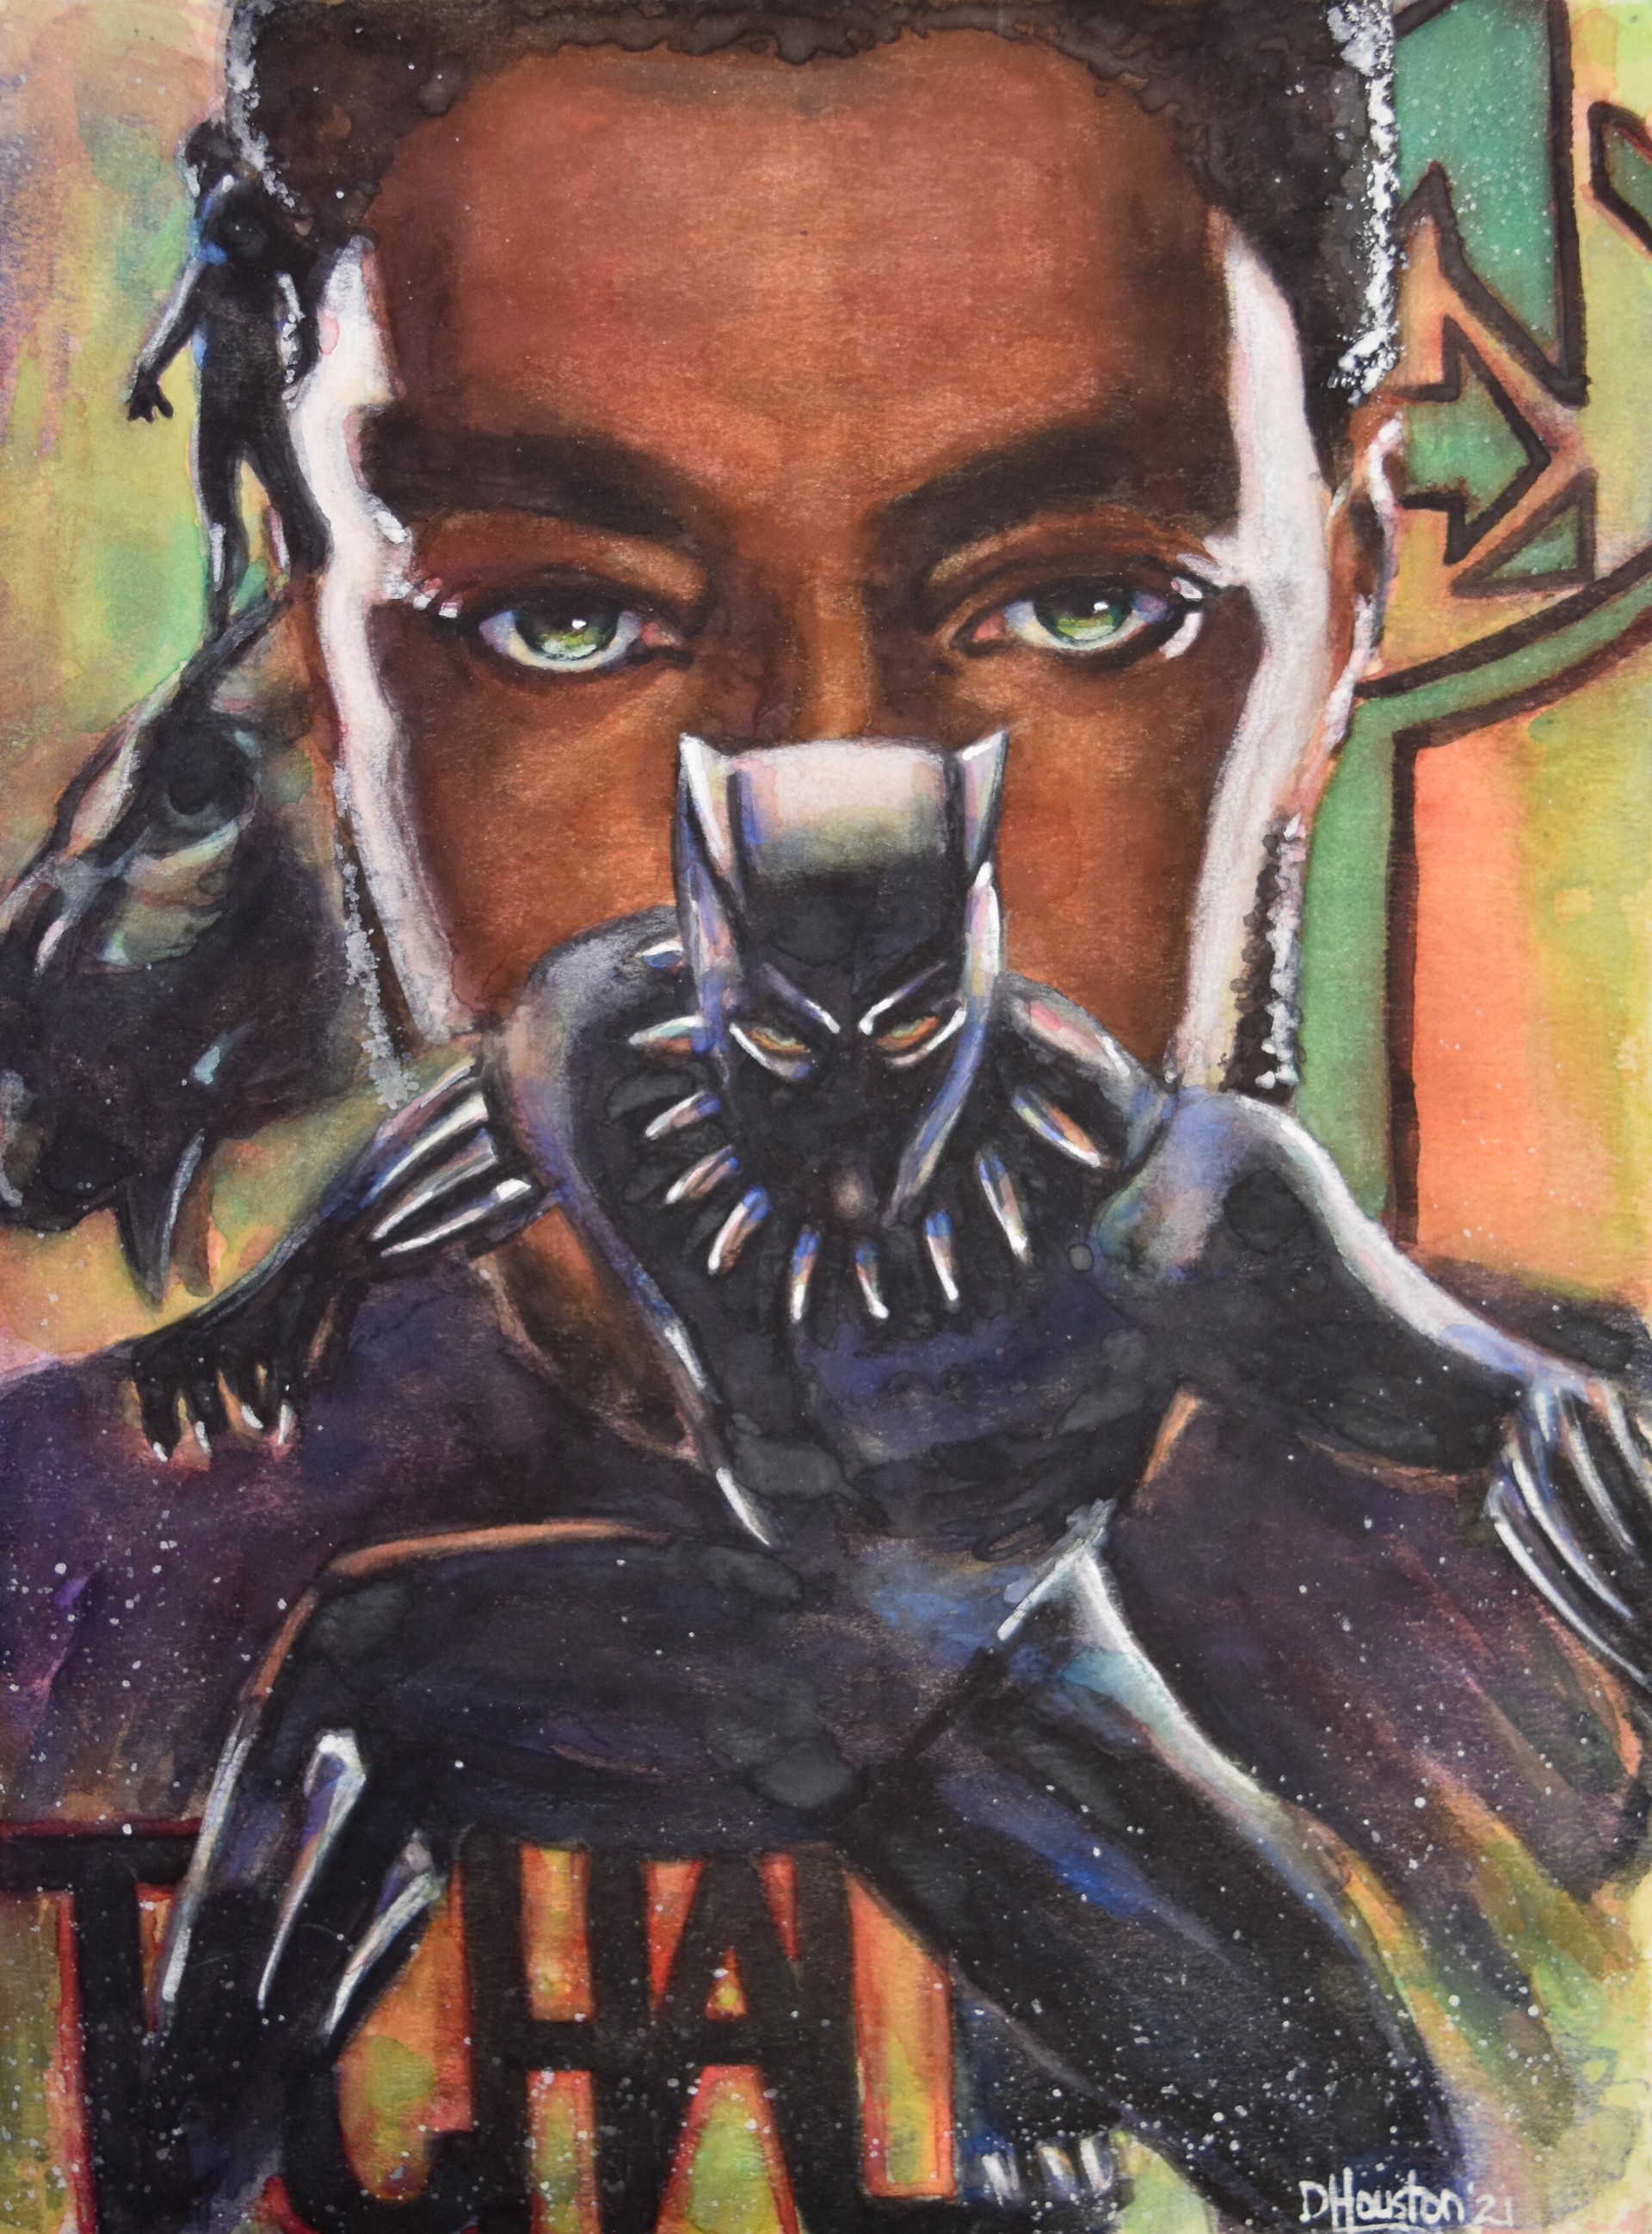 Black Panther: Long Live the King by D. Houston